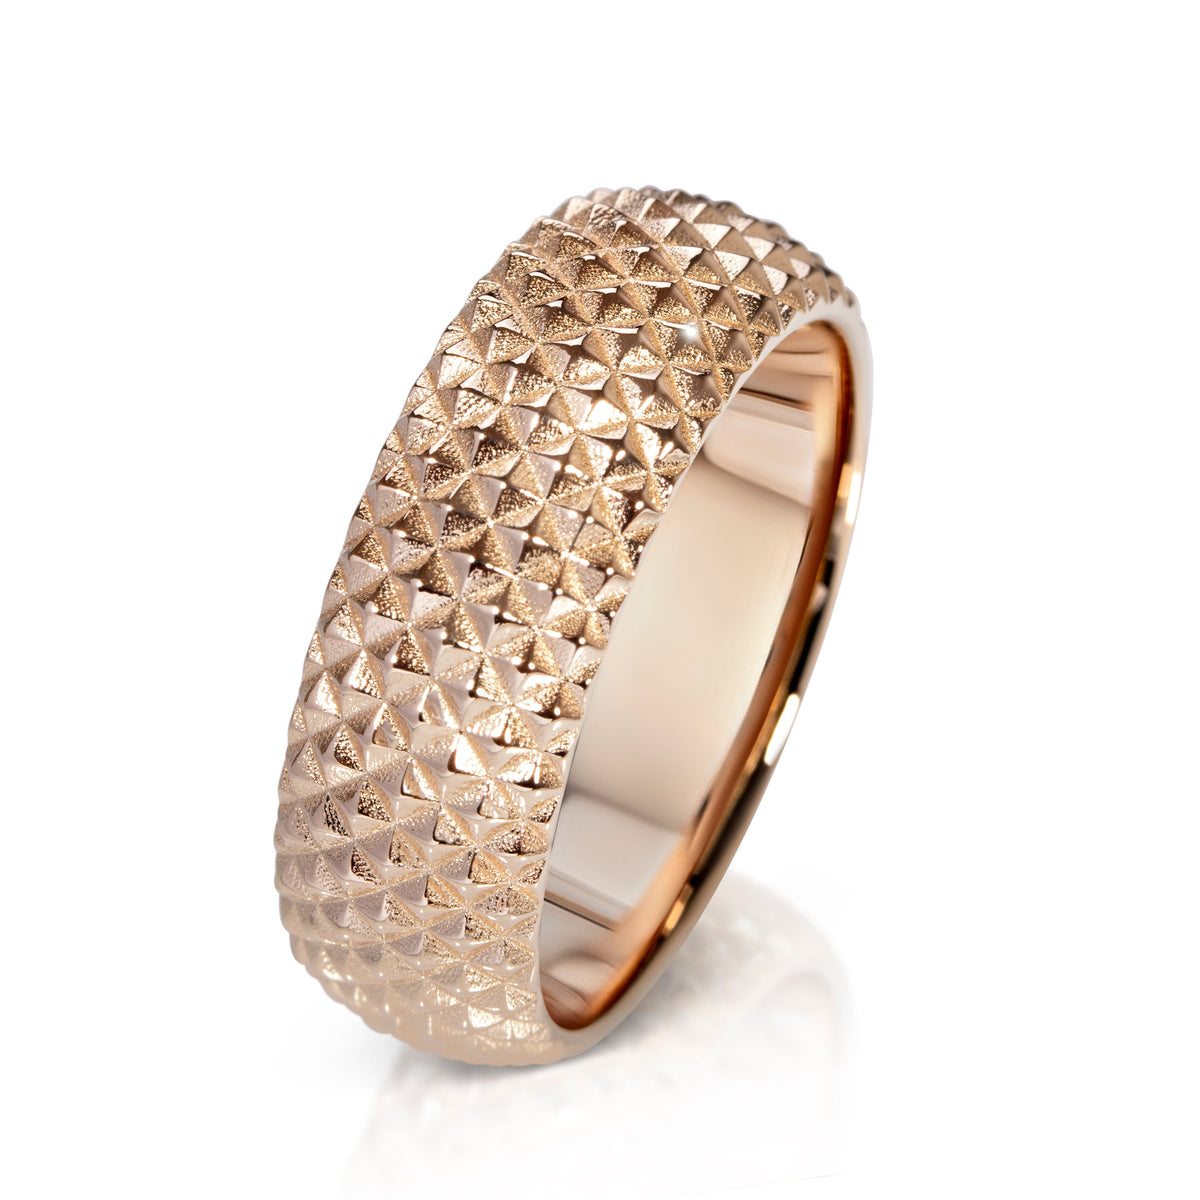 Magnificent textured and round shaped 9 mmring